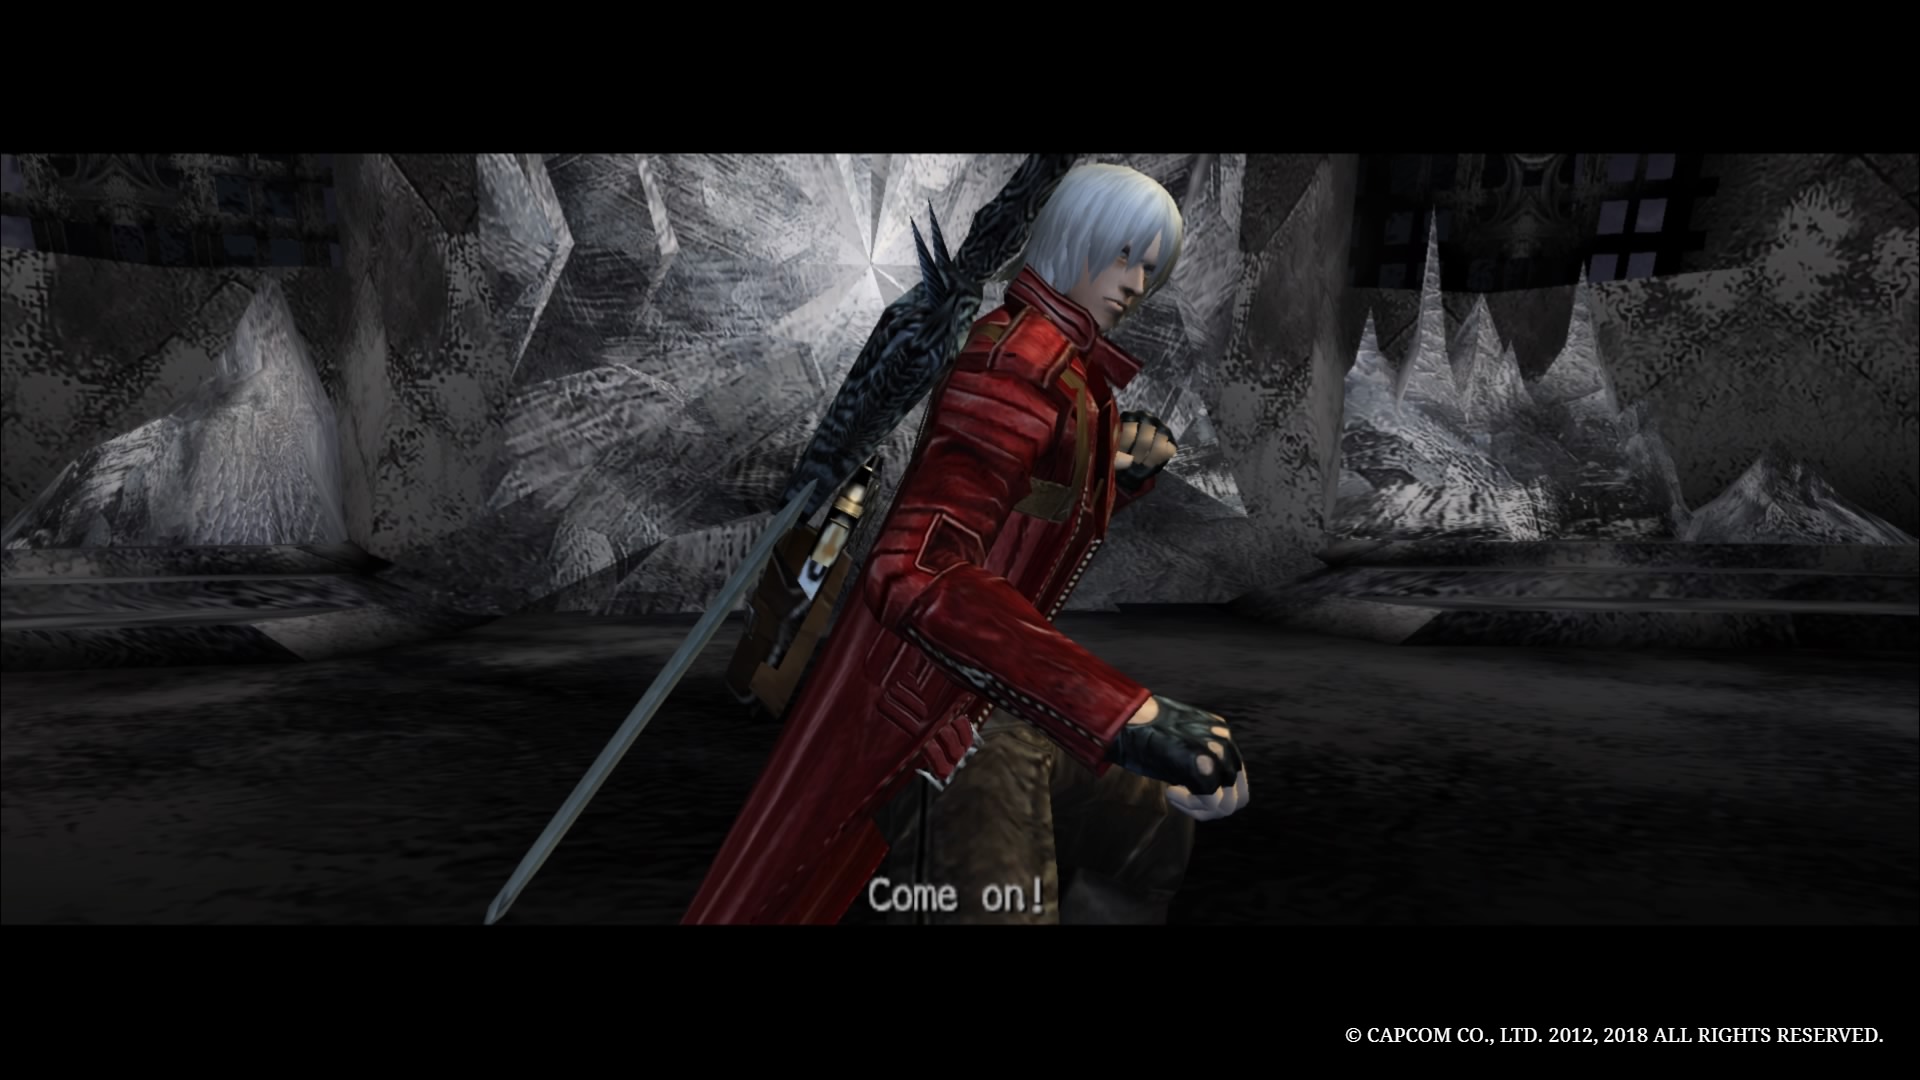 Devil May Cry HD Collection PS4 review – infernal remasters